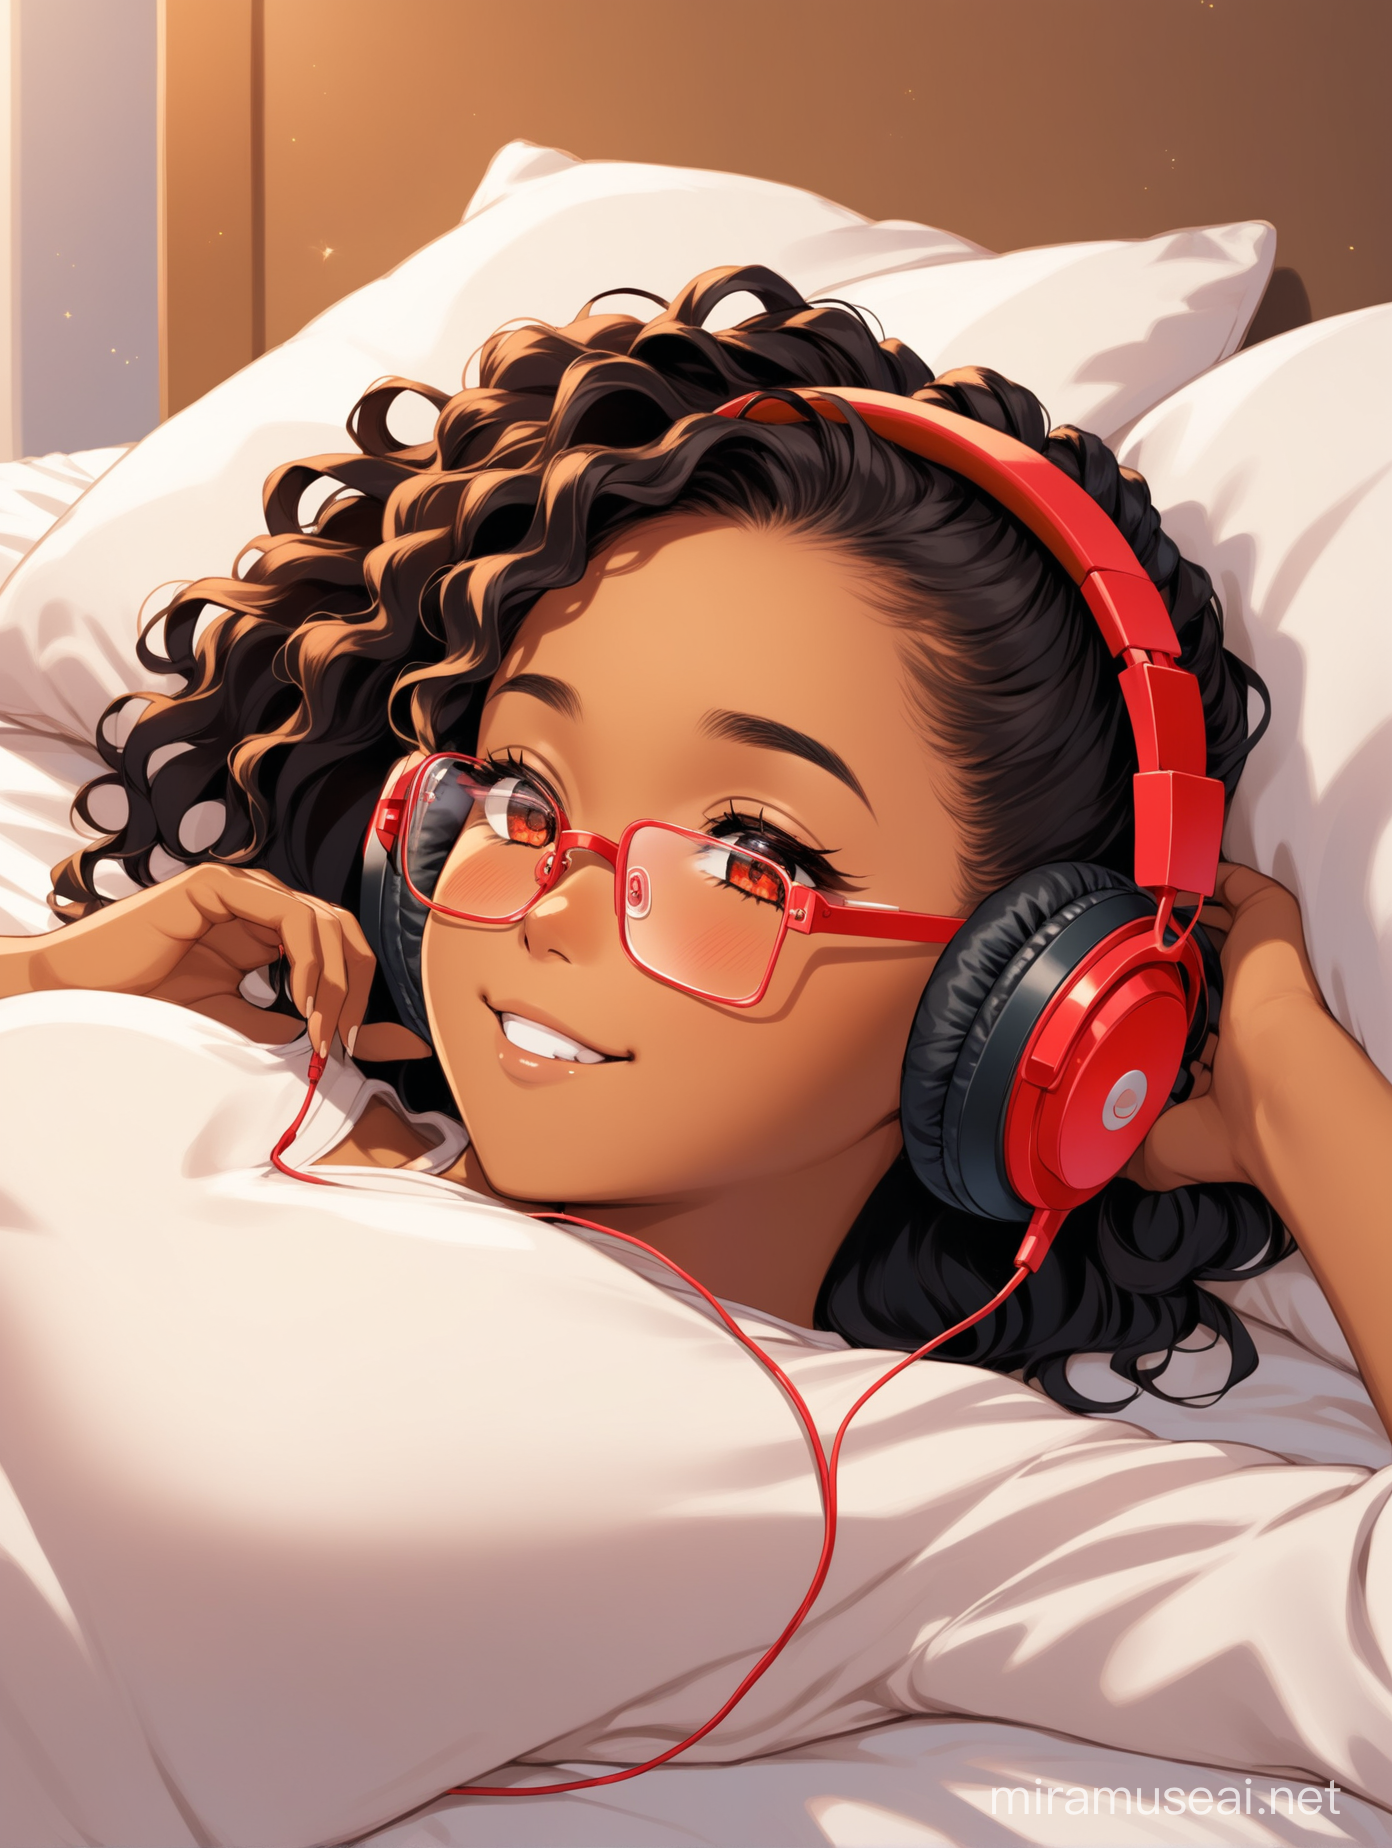 a 21 year old black women, she has a dark brown colored passion twist hairstyle, she is wearing a pair of red square shapped eye glasses on her face, she is wearing headphone on her ears, she is listening to music with her eyes close and a smile on her face, she is listening to music while laying down on the bed